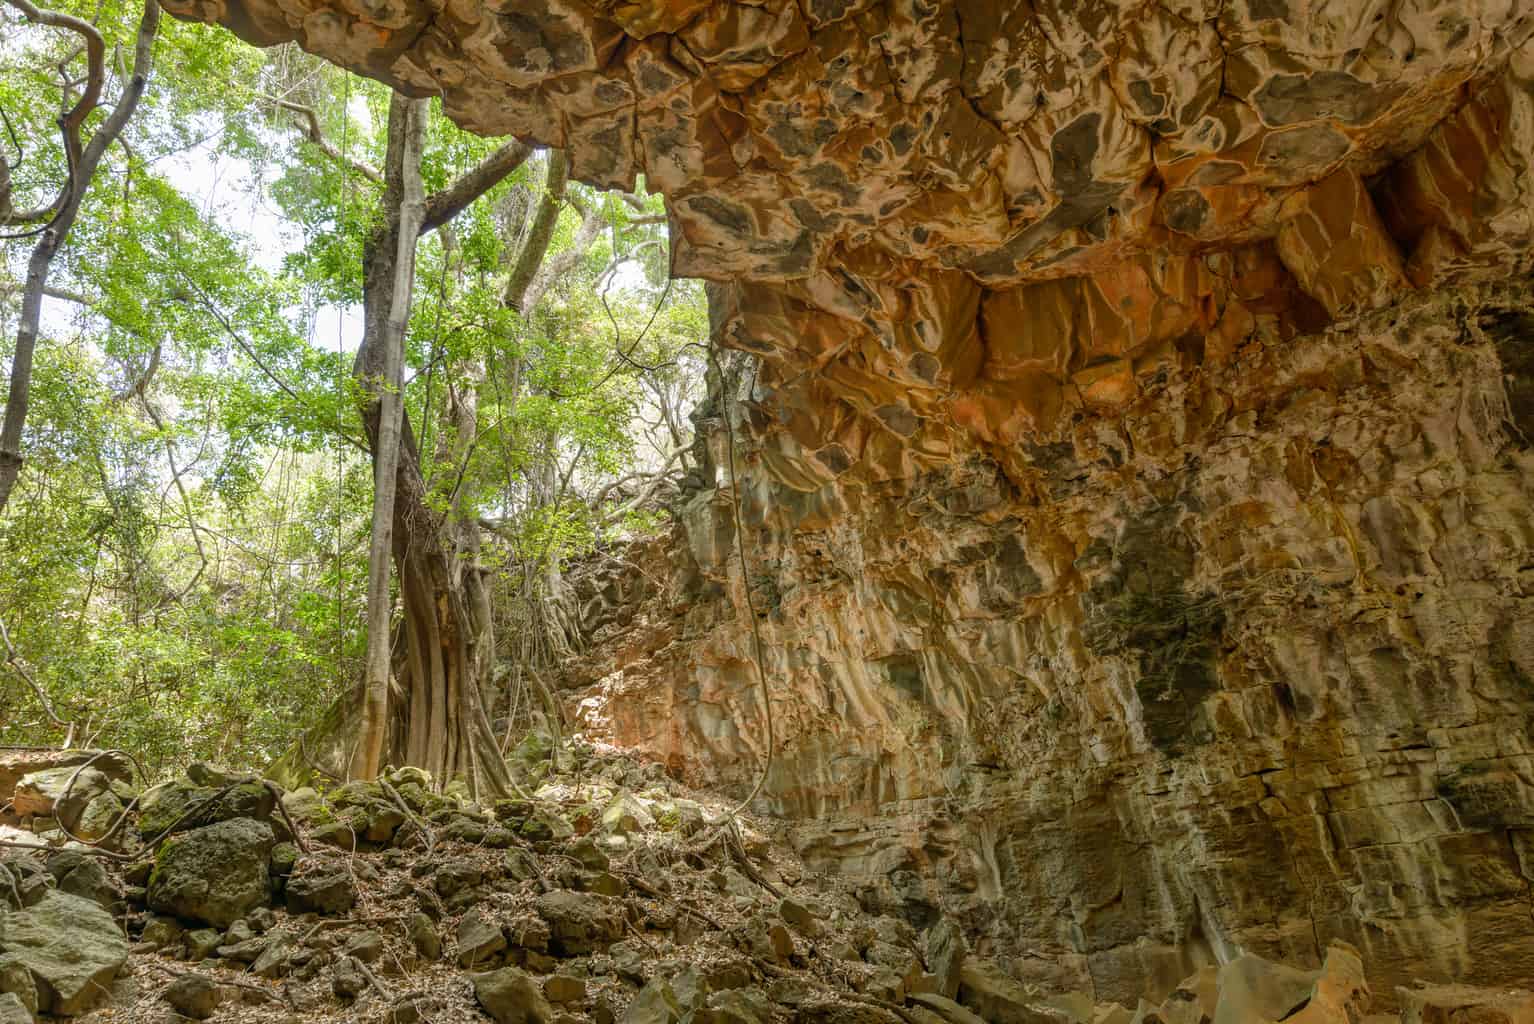  The entrance to the Undara Lava Tubes in Undara Volcanic National Park in North Queensland Australia. 